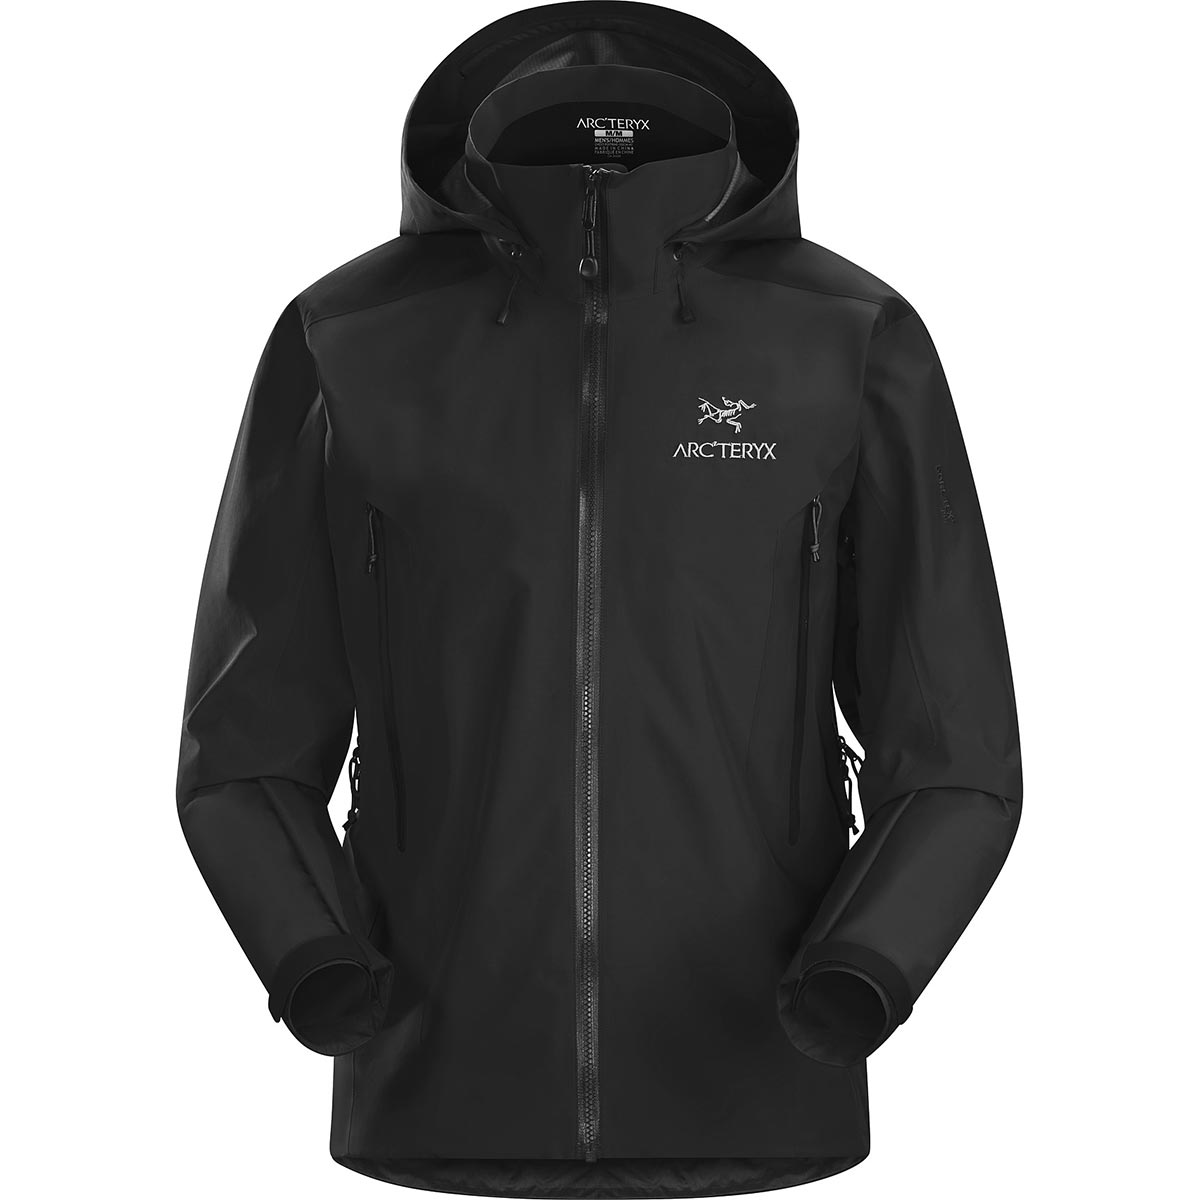 Arc'teryx Beta AR Jacket, men's, discontinued Fall 2017 and Spring 2018 ...